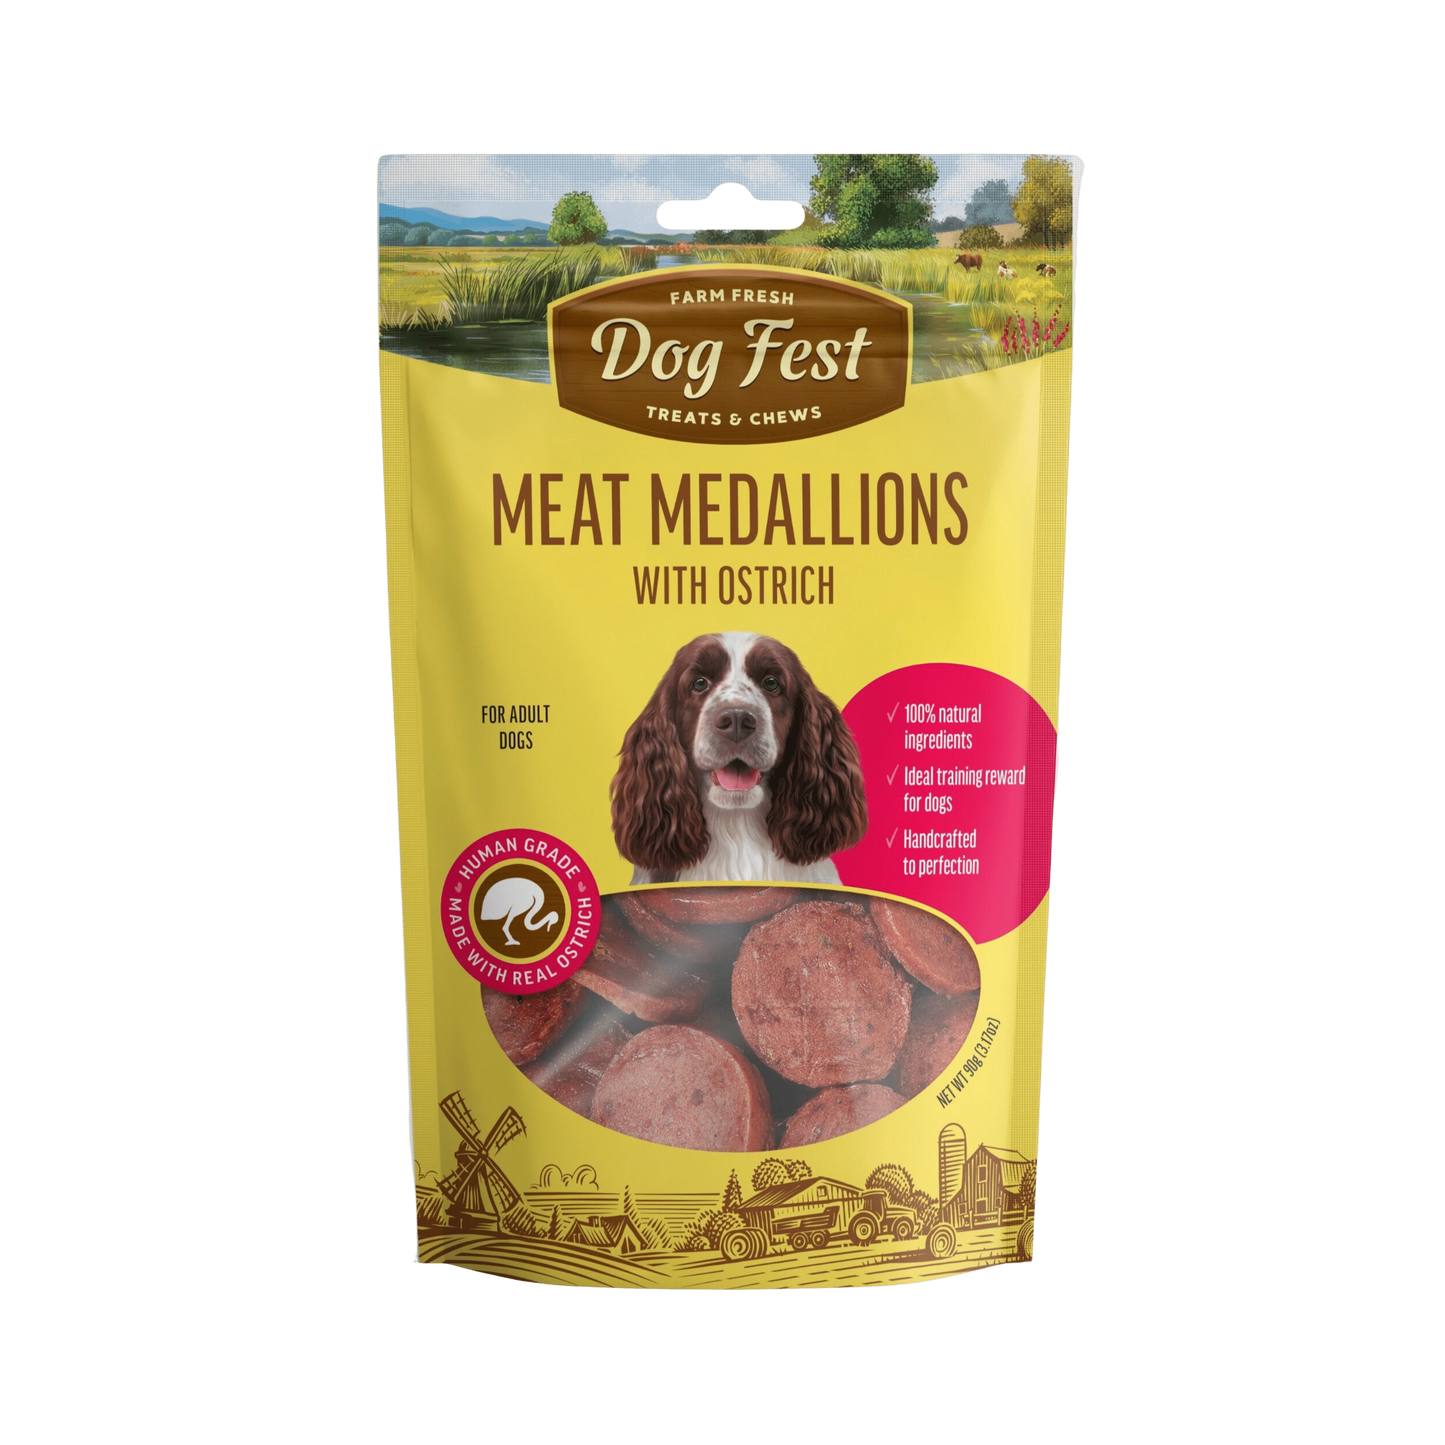 DOGFEST MEDALLIONS WITH OSTRICH - Animeal